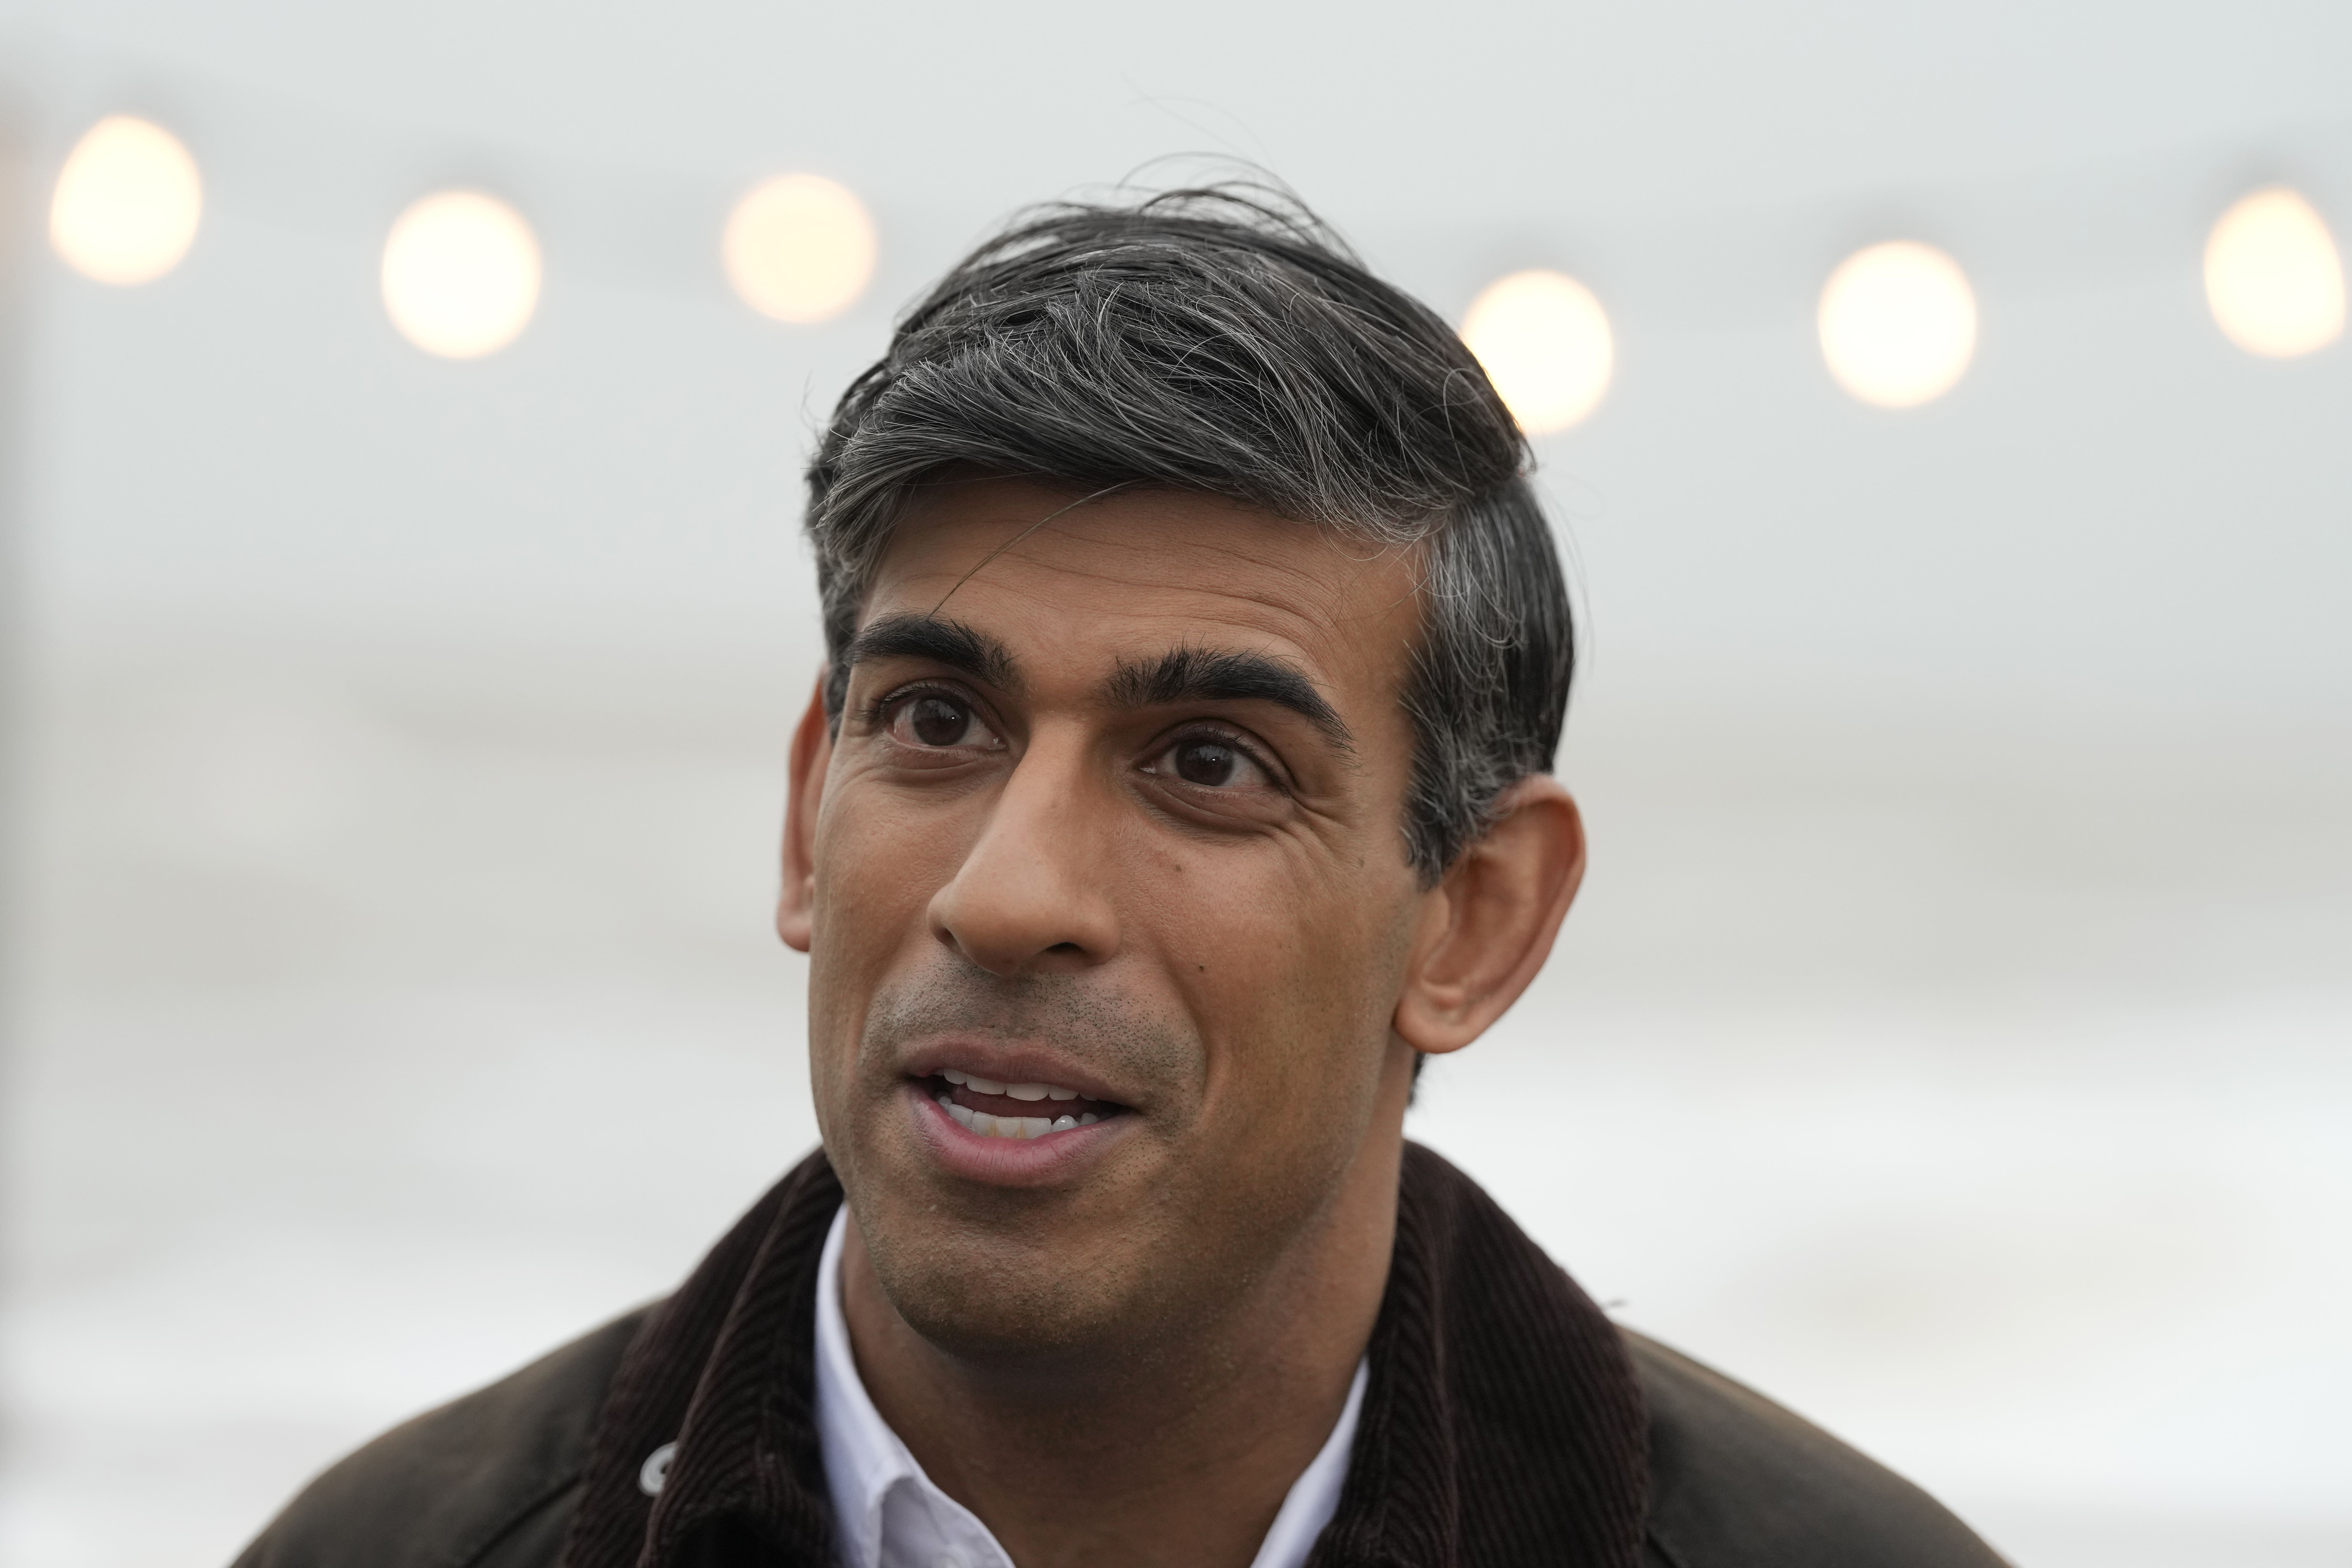 Rishi Sunak is said to be considering slashing inheritance tax or stamp duty to win back support